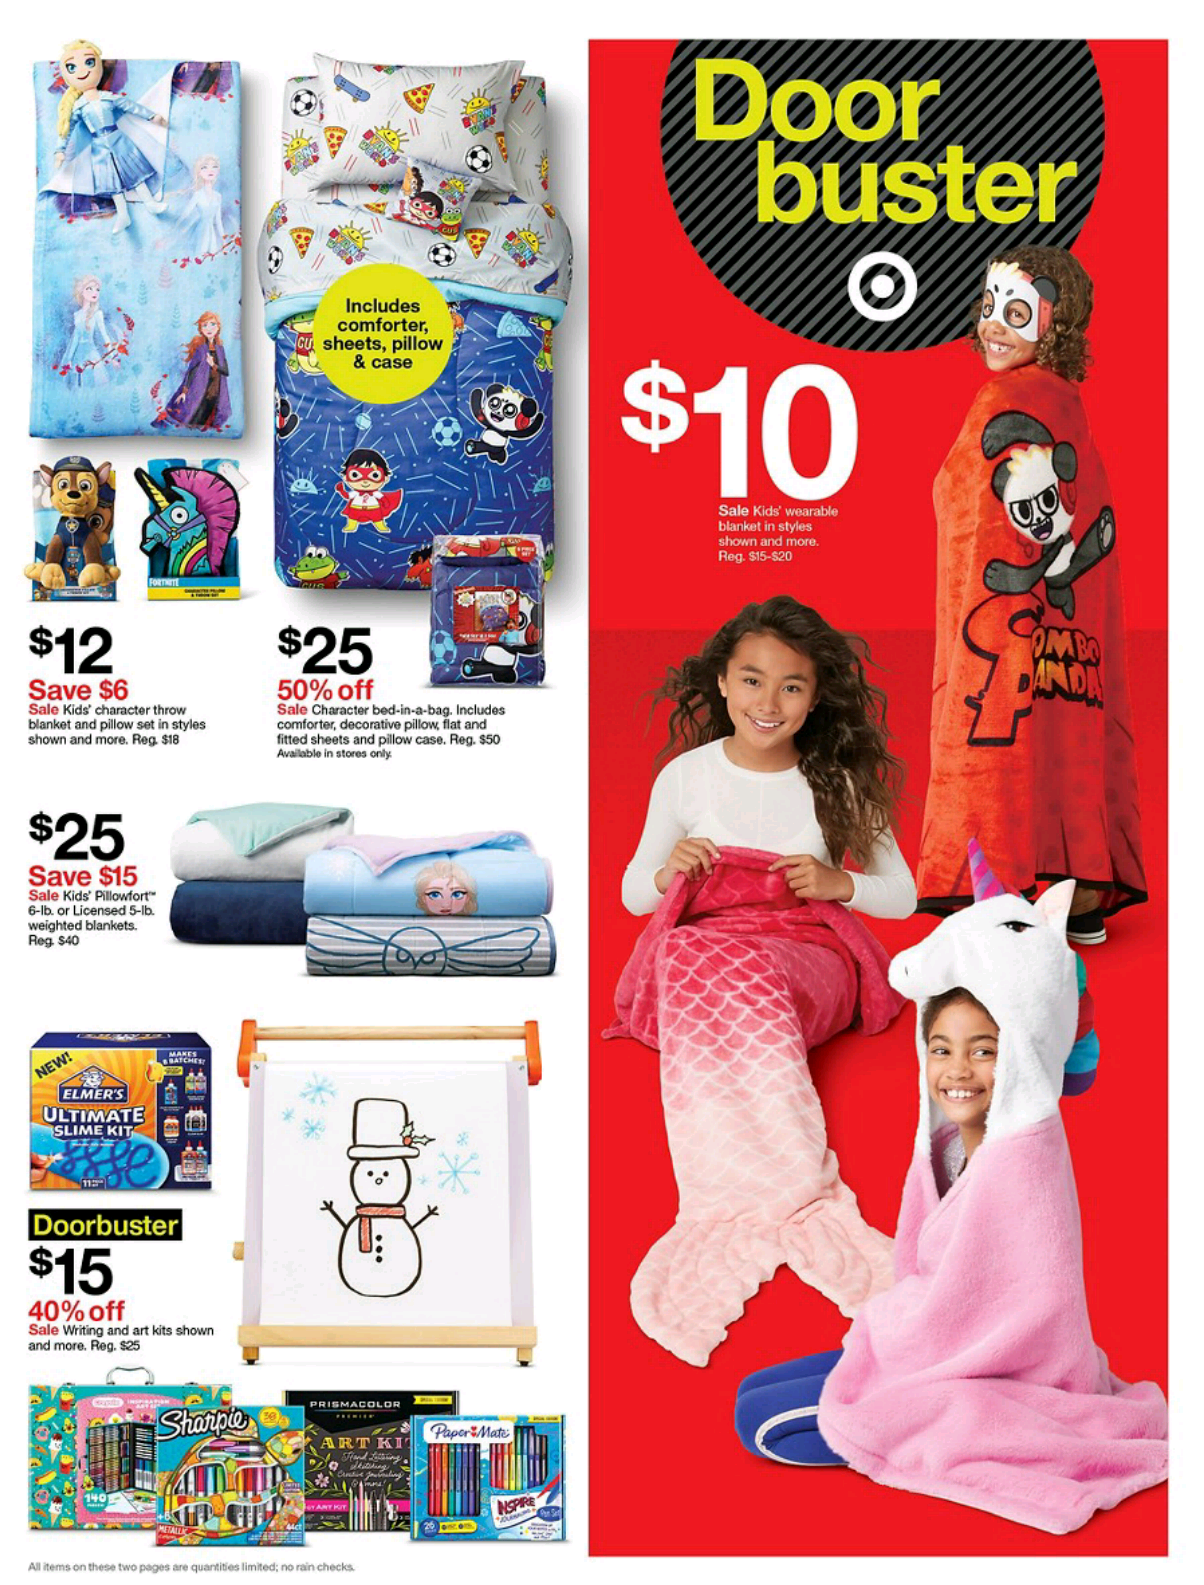 It’s Here! 2019 Target Black Friday Ad Preview - Page 8 of 13 - 0